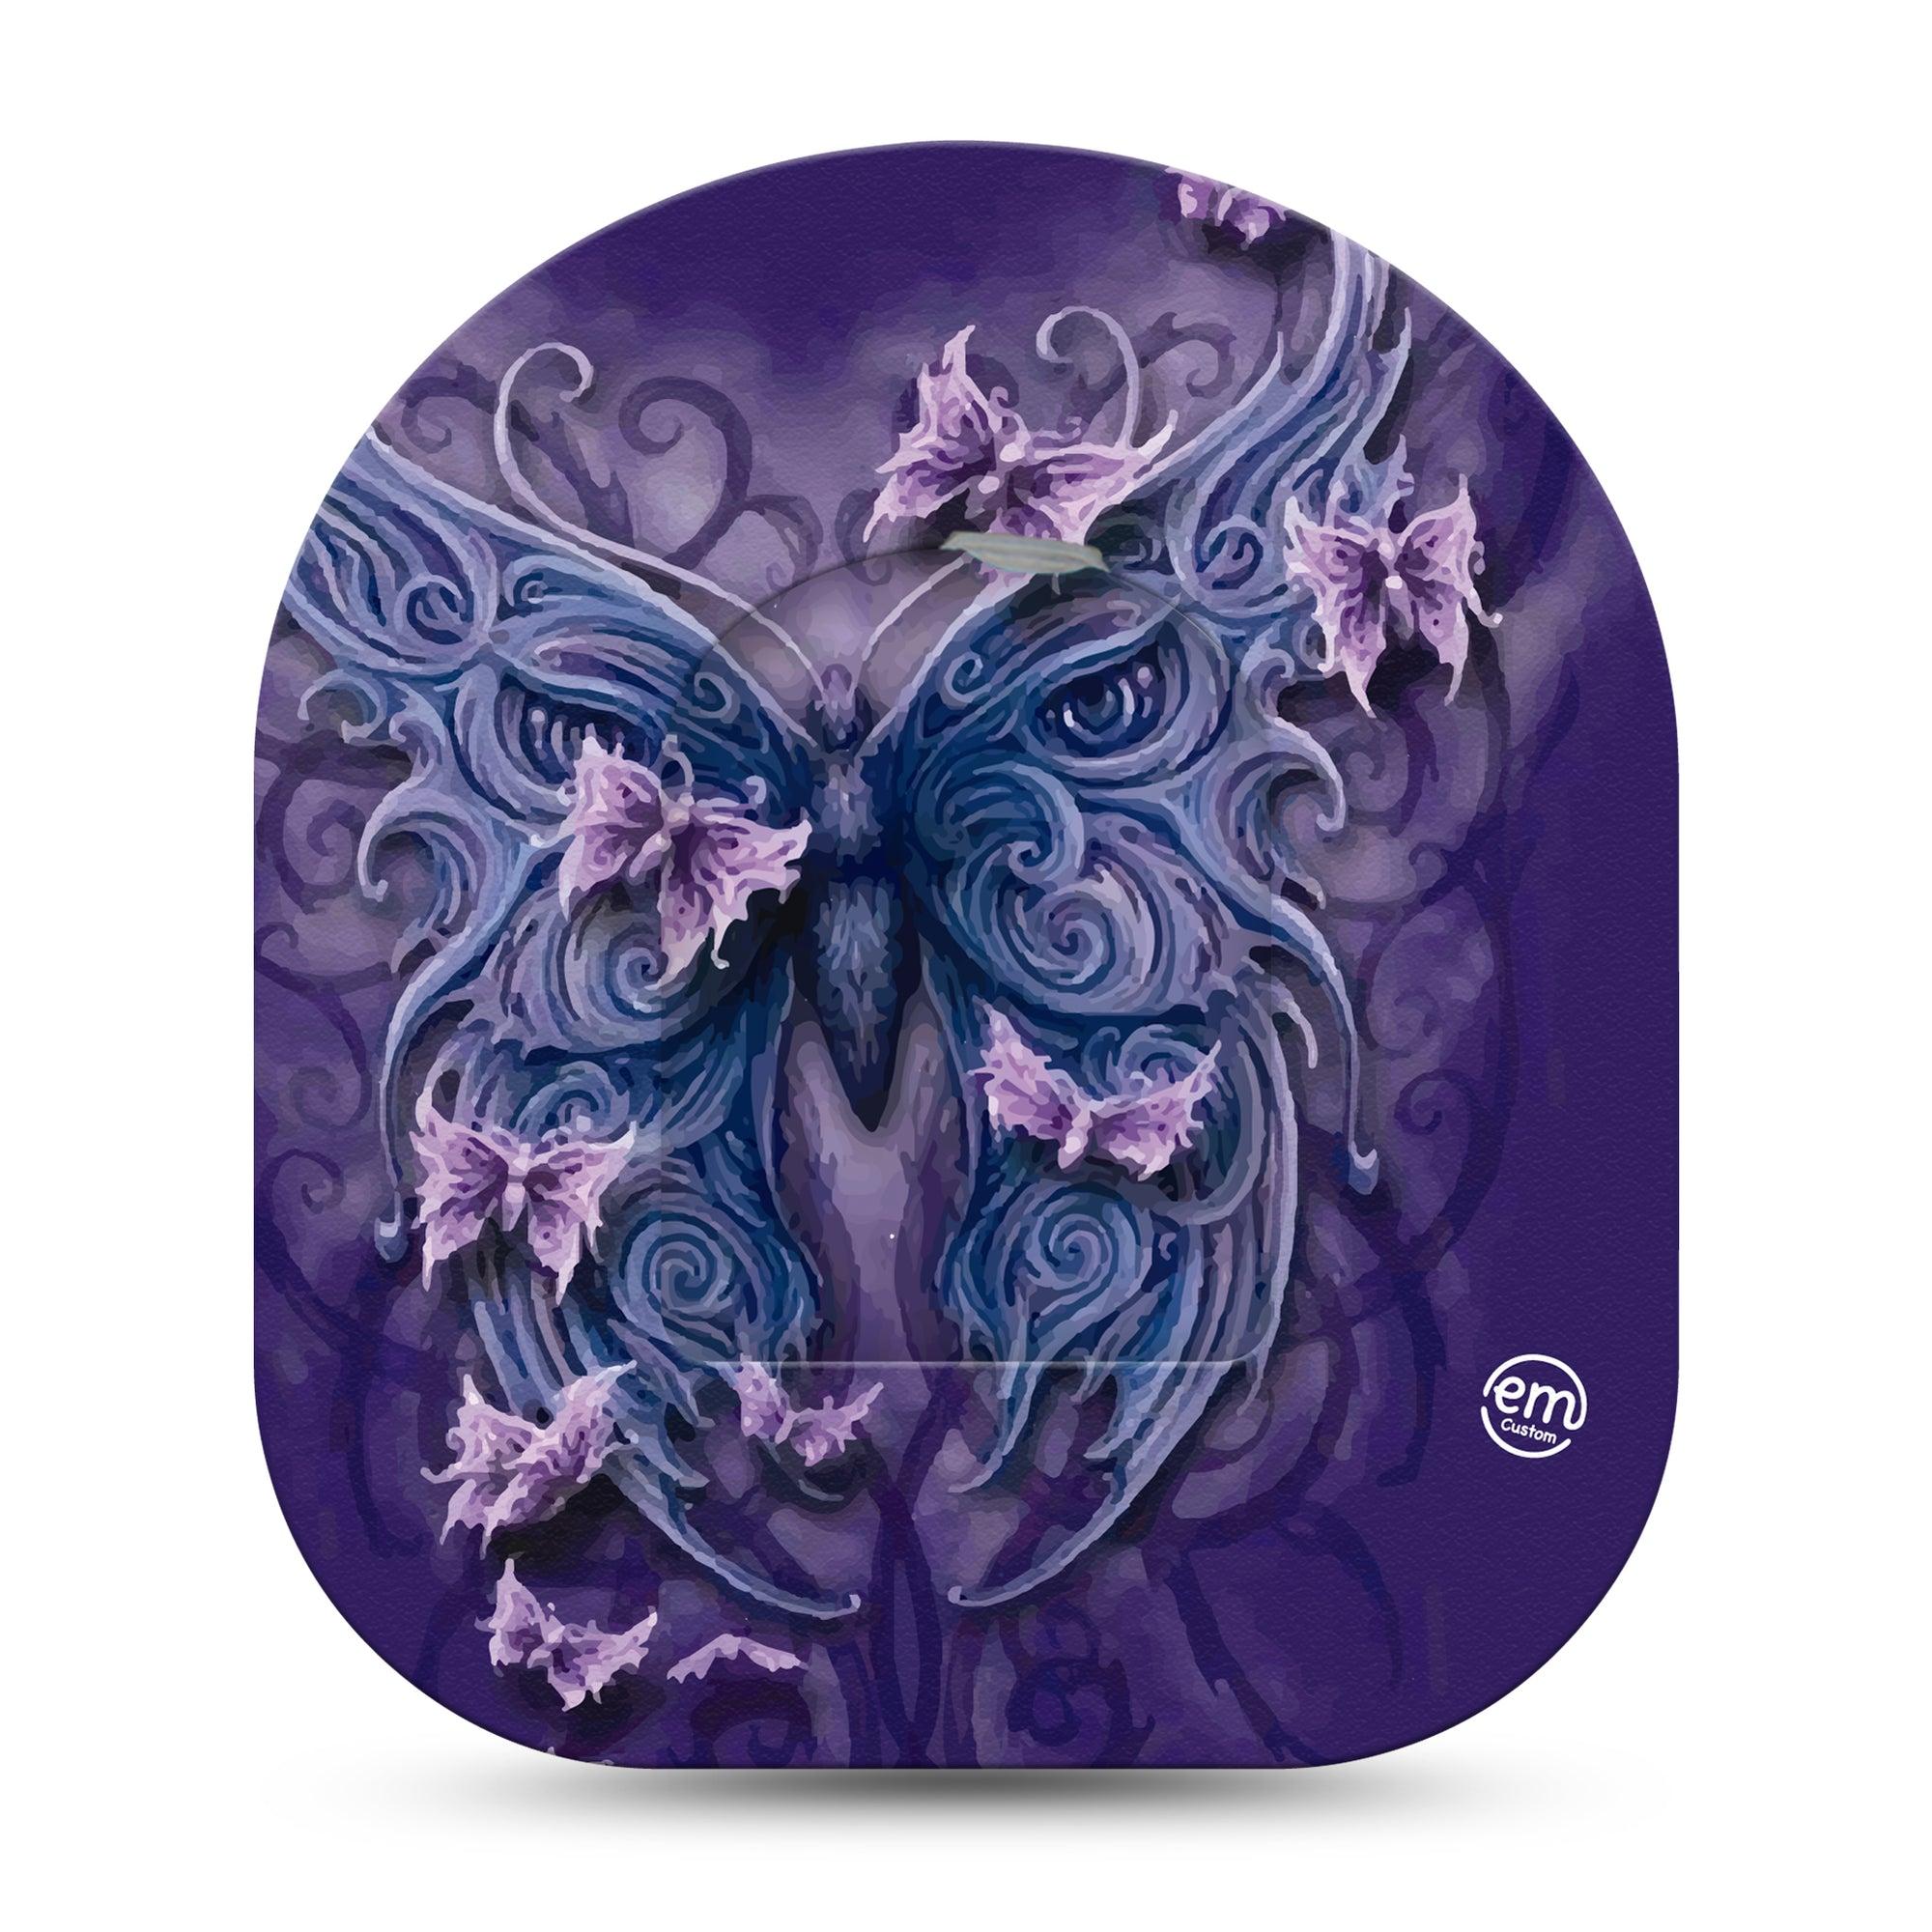 ExpressionMed Purple Butterfly Pod Full Wrap Sticker Single with Matching Omnipod Patch Sticker Deep Purple Butterflies Decorative Decal Pump design